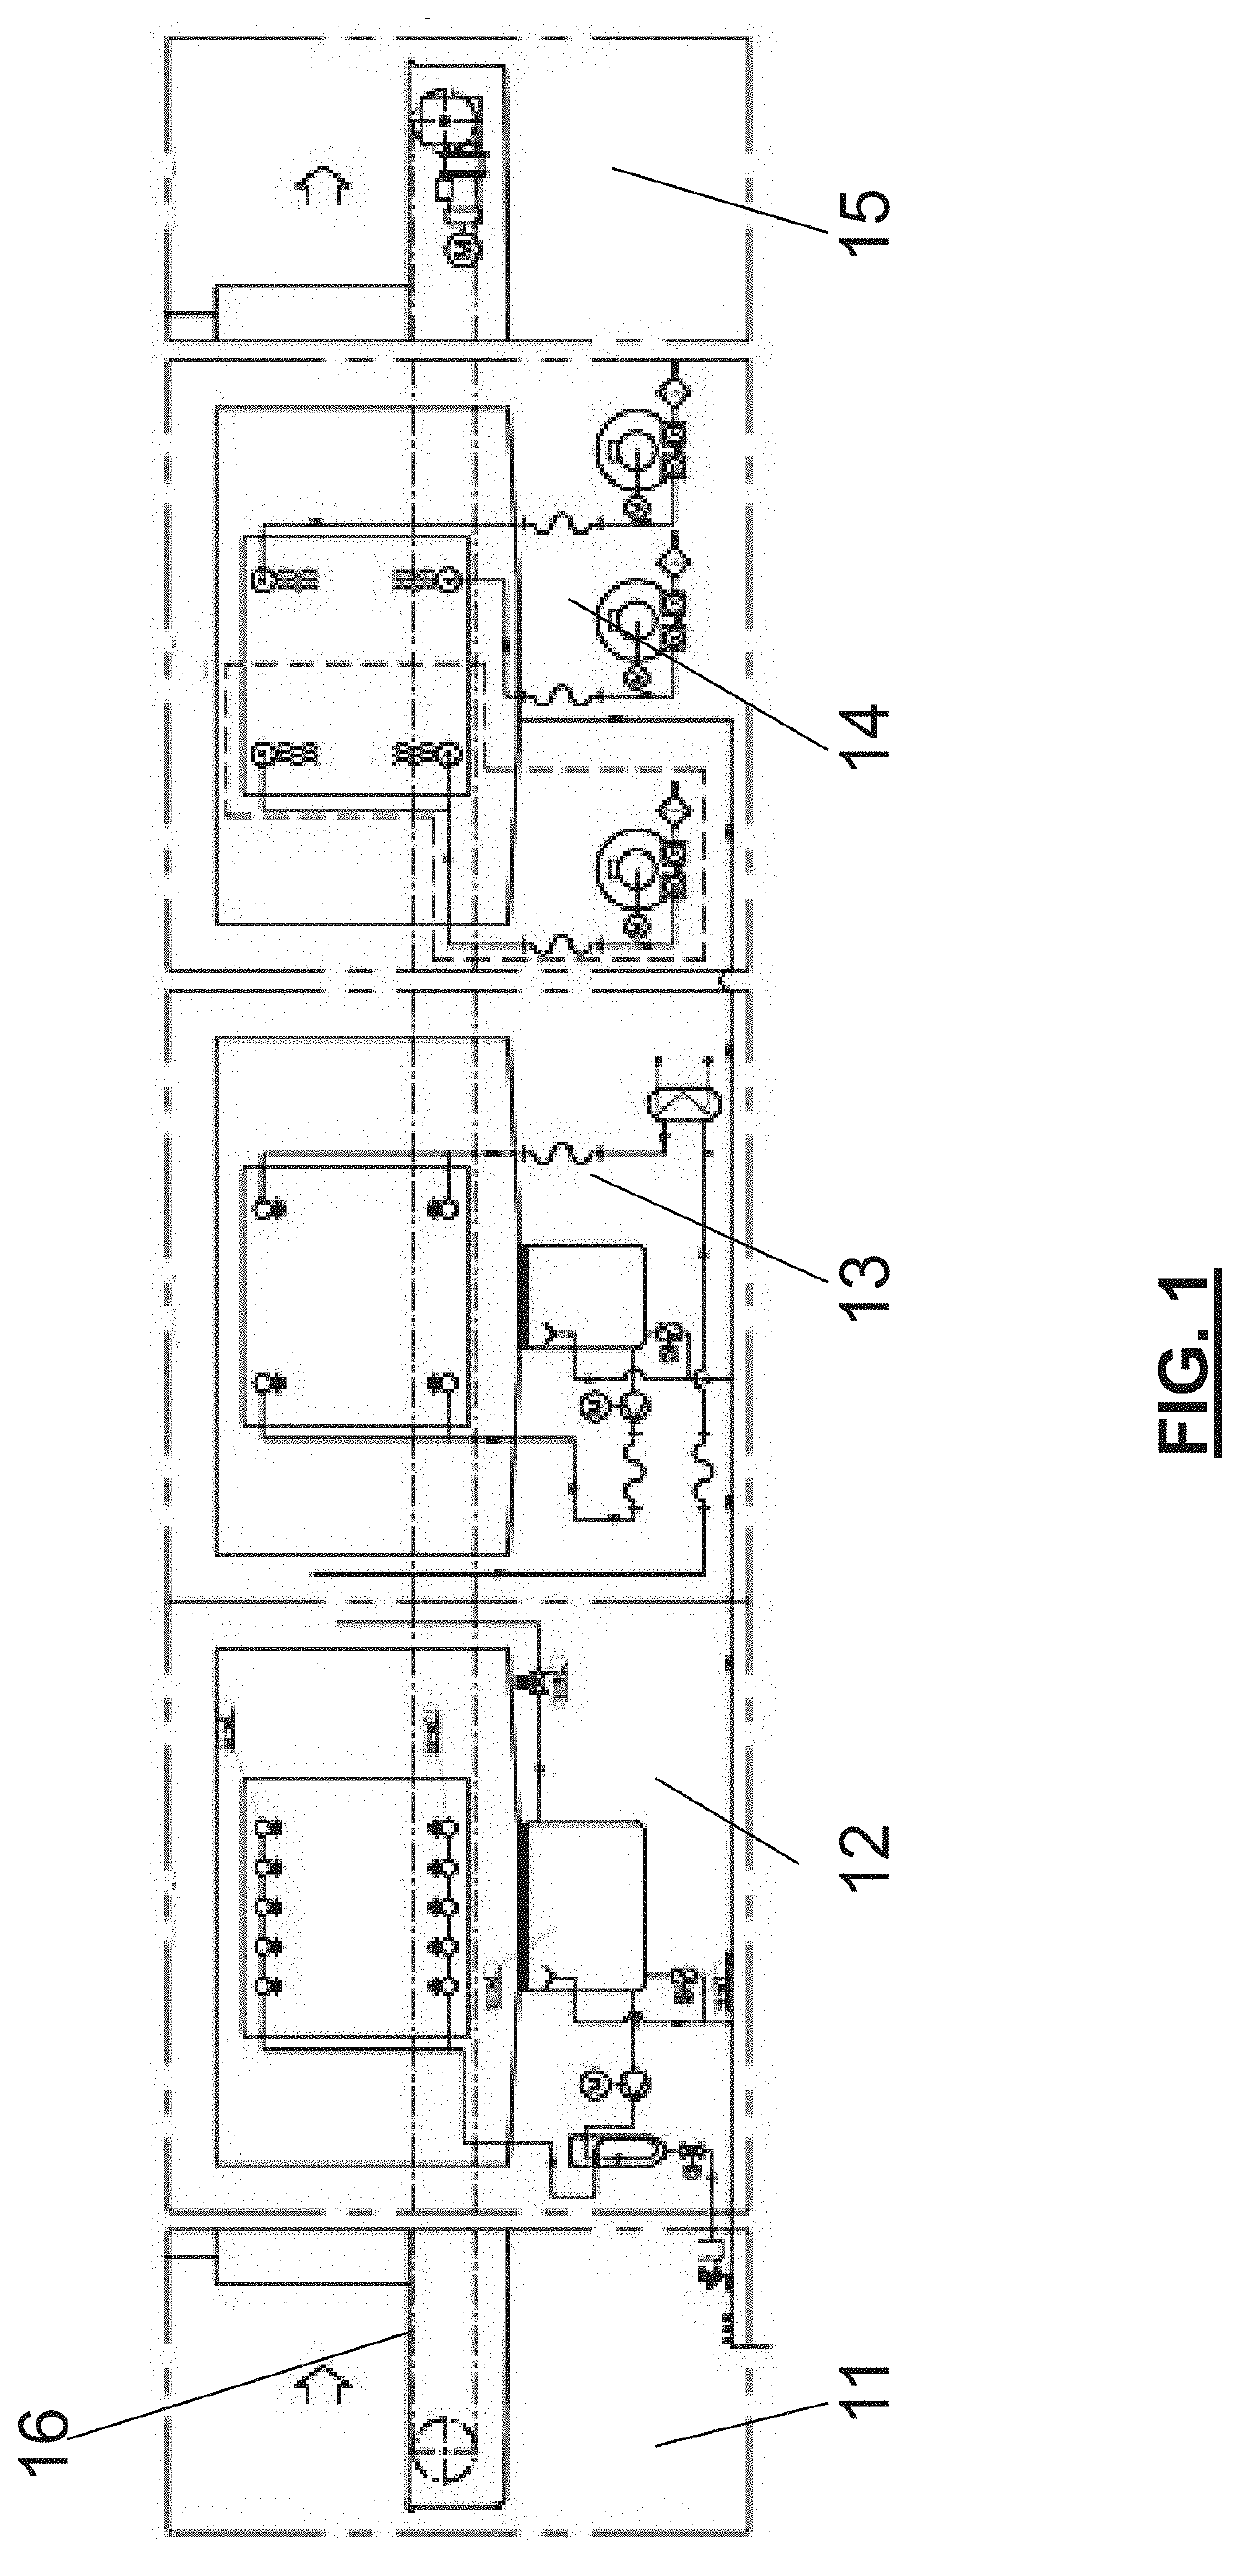 System for treating wash waste liquid, adapted for application in a continuous tunnel washing machine in the field of preclinical pharmaceutical research